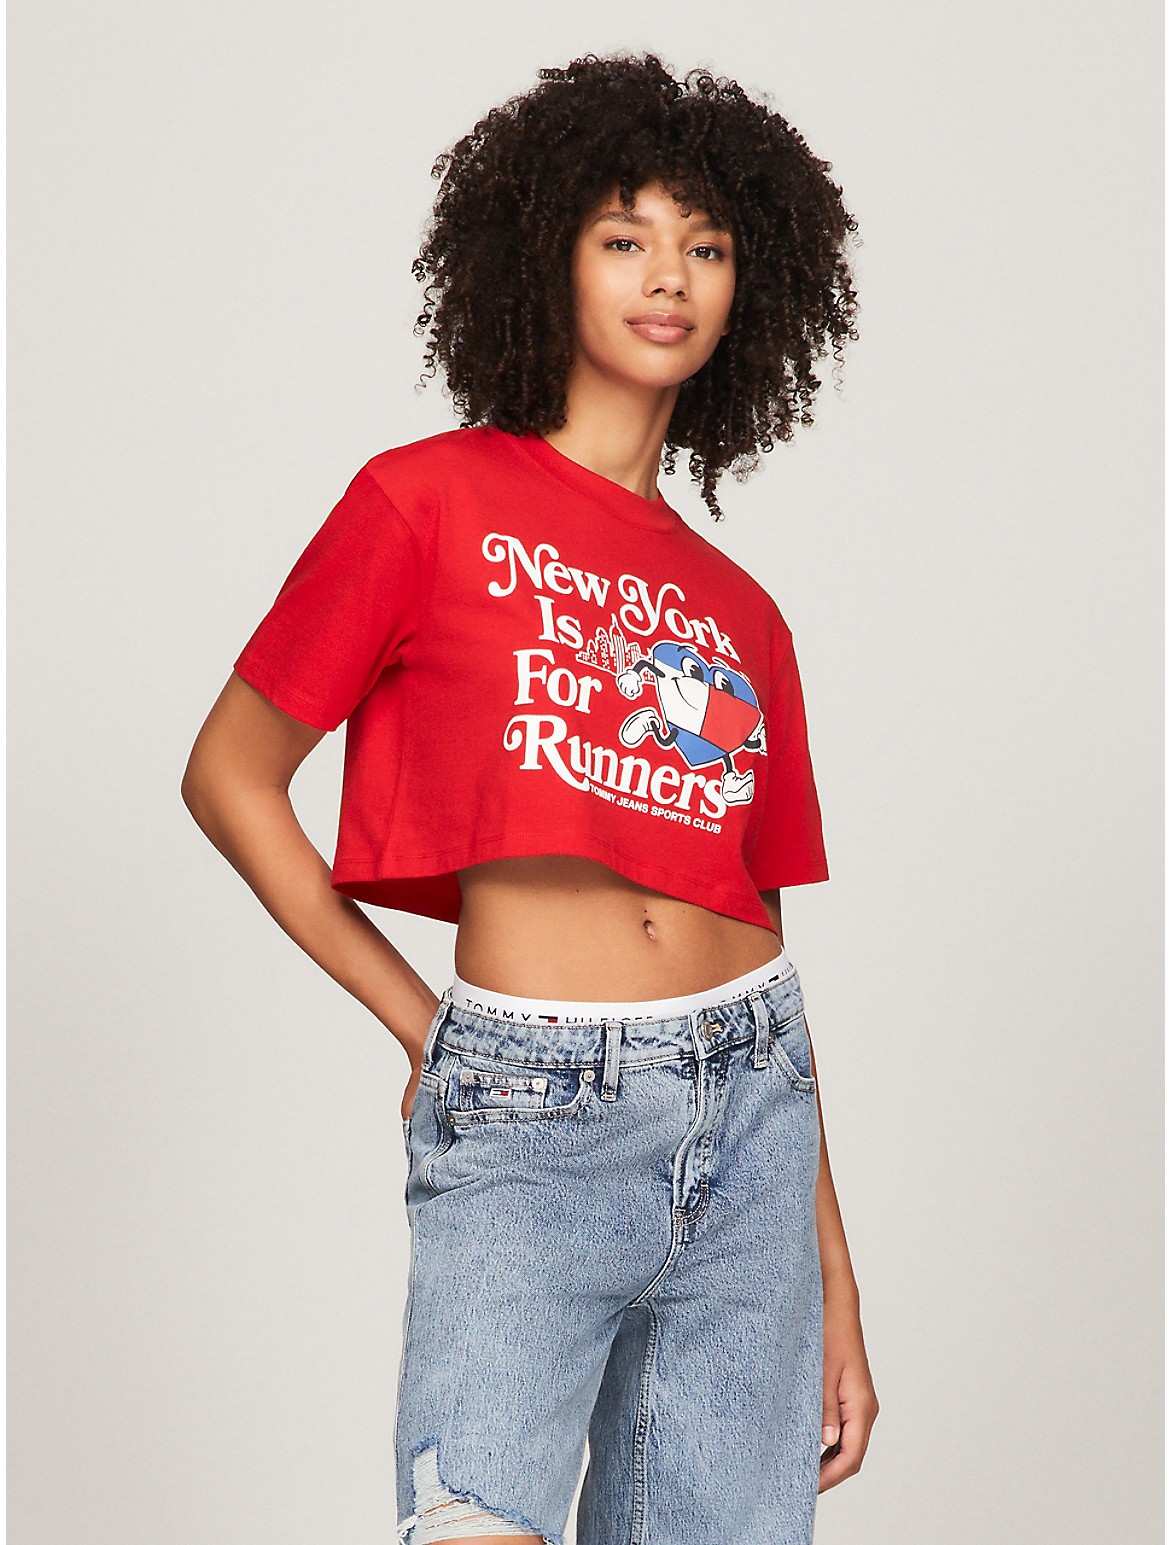 Tommy Hilfiger Women's Oversized Fit TJ Runner Graphic T-Shirt